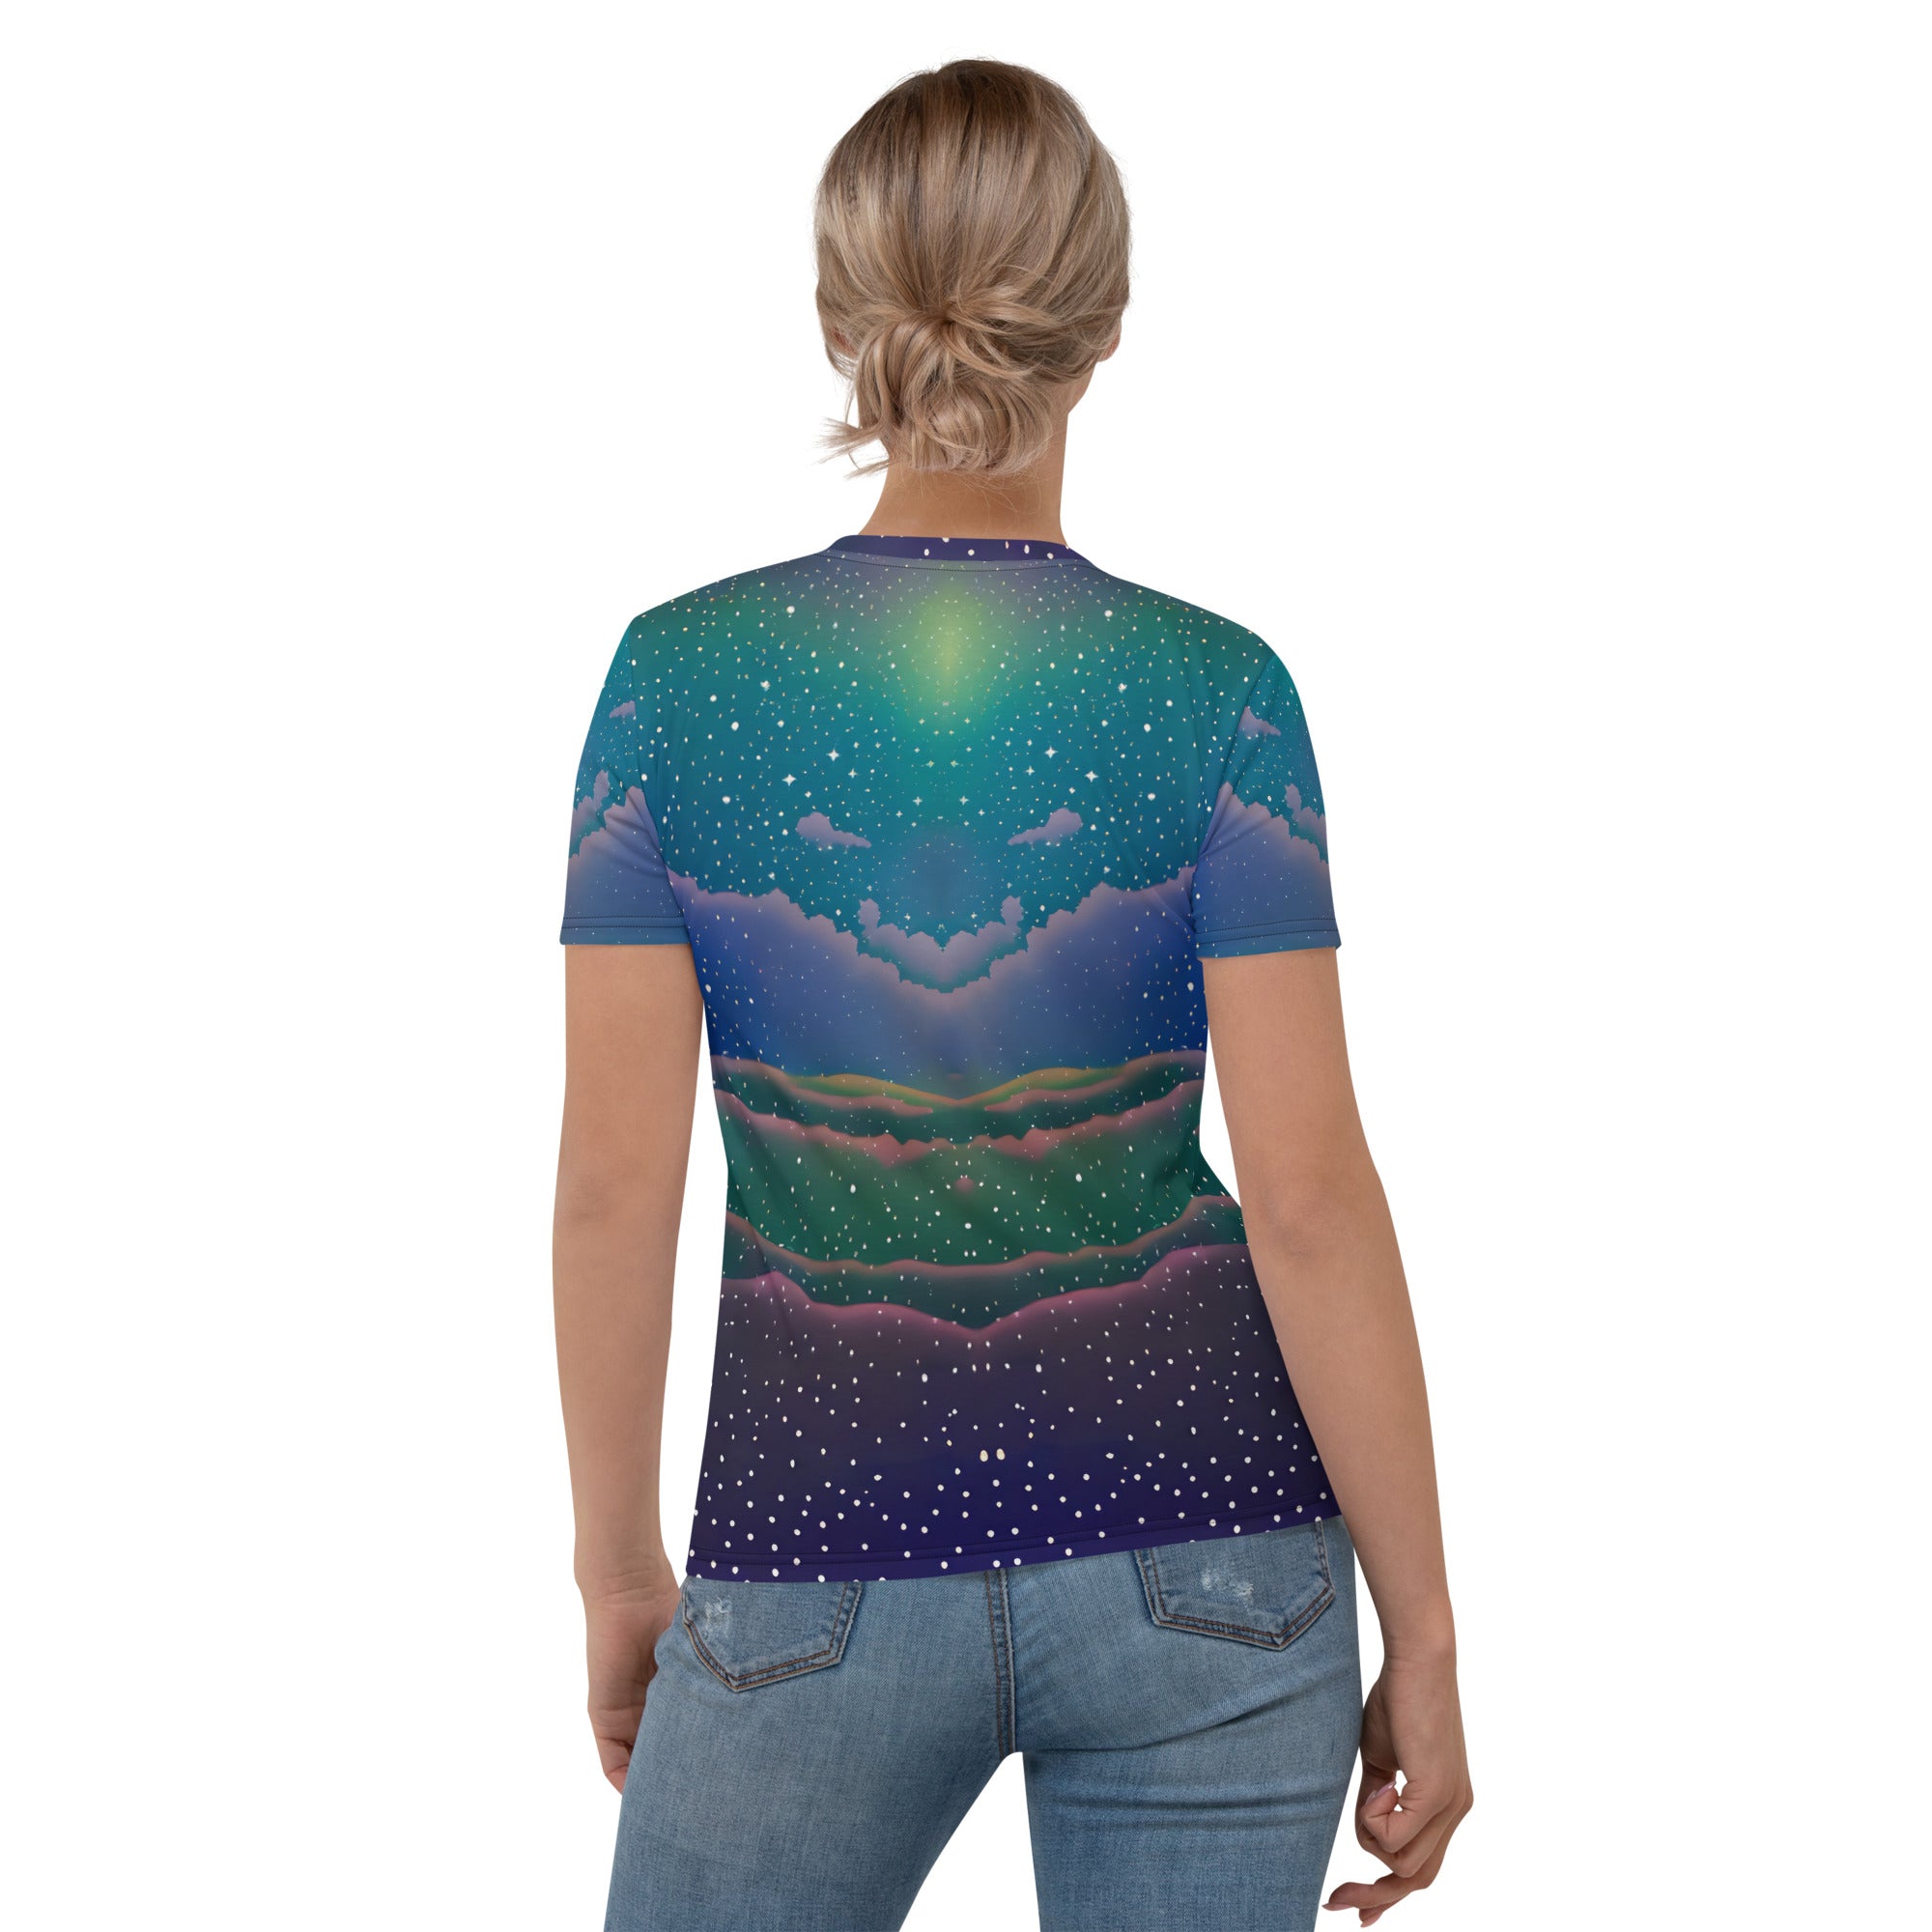 Comfortable Fit on the Infinite Blossoms Women's Crew Neck T-Shirt